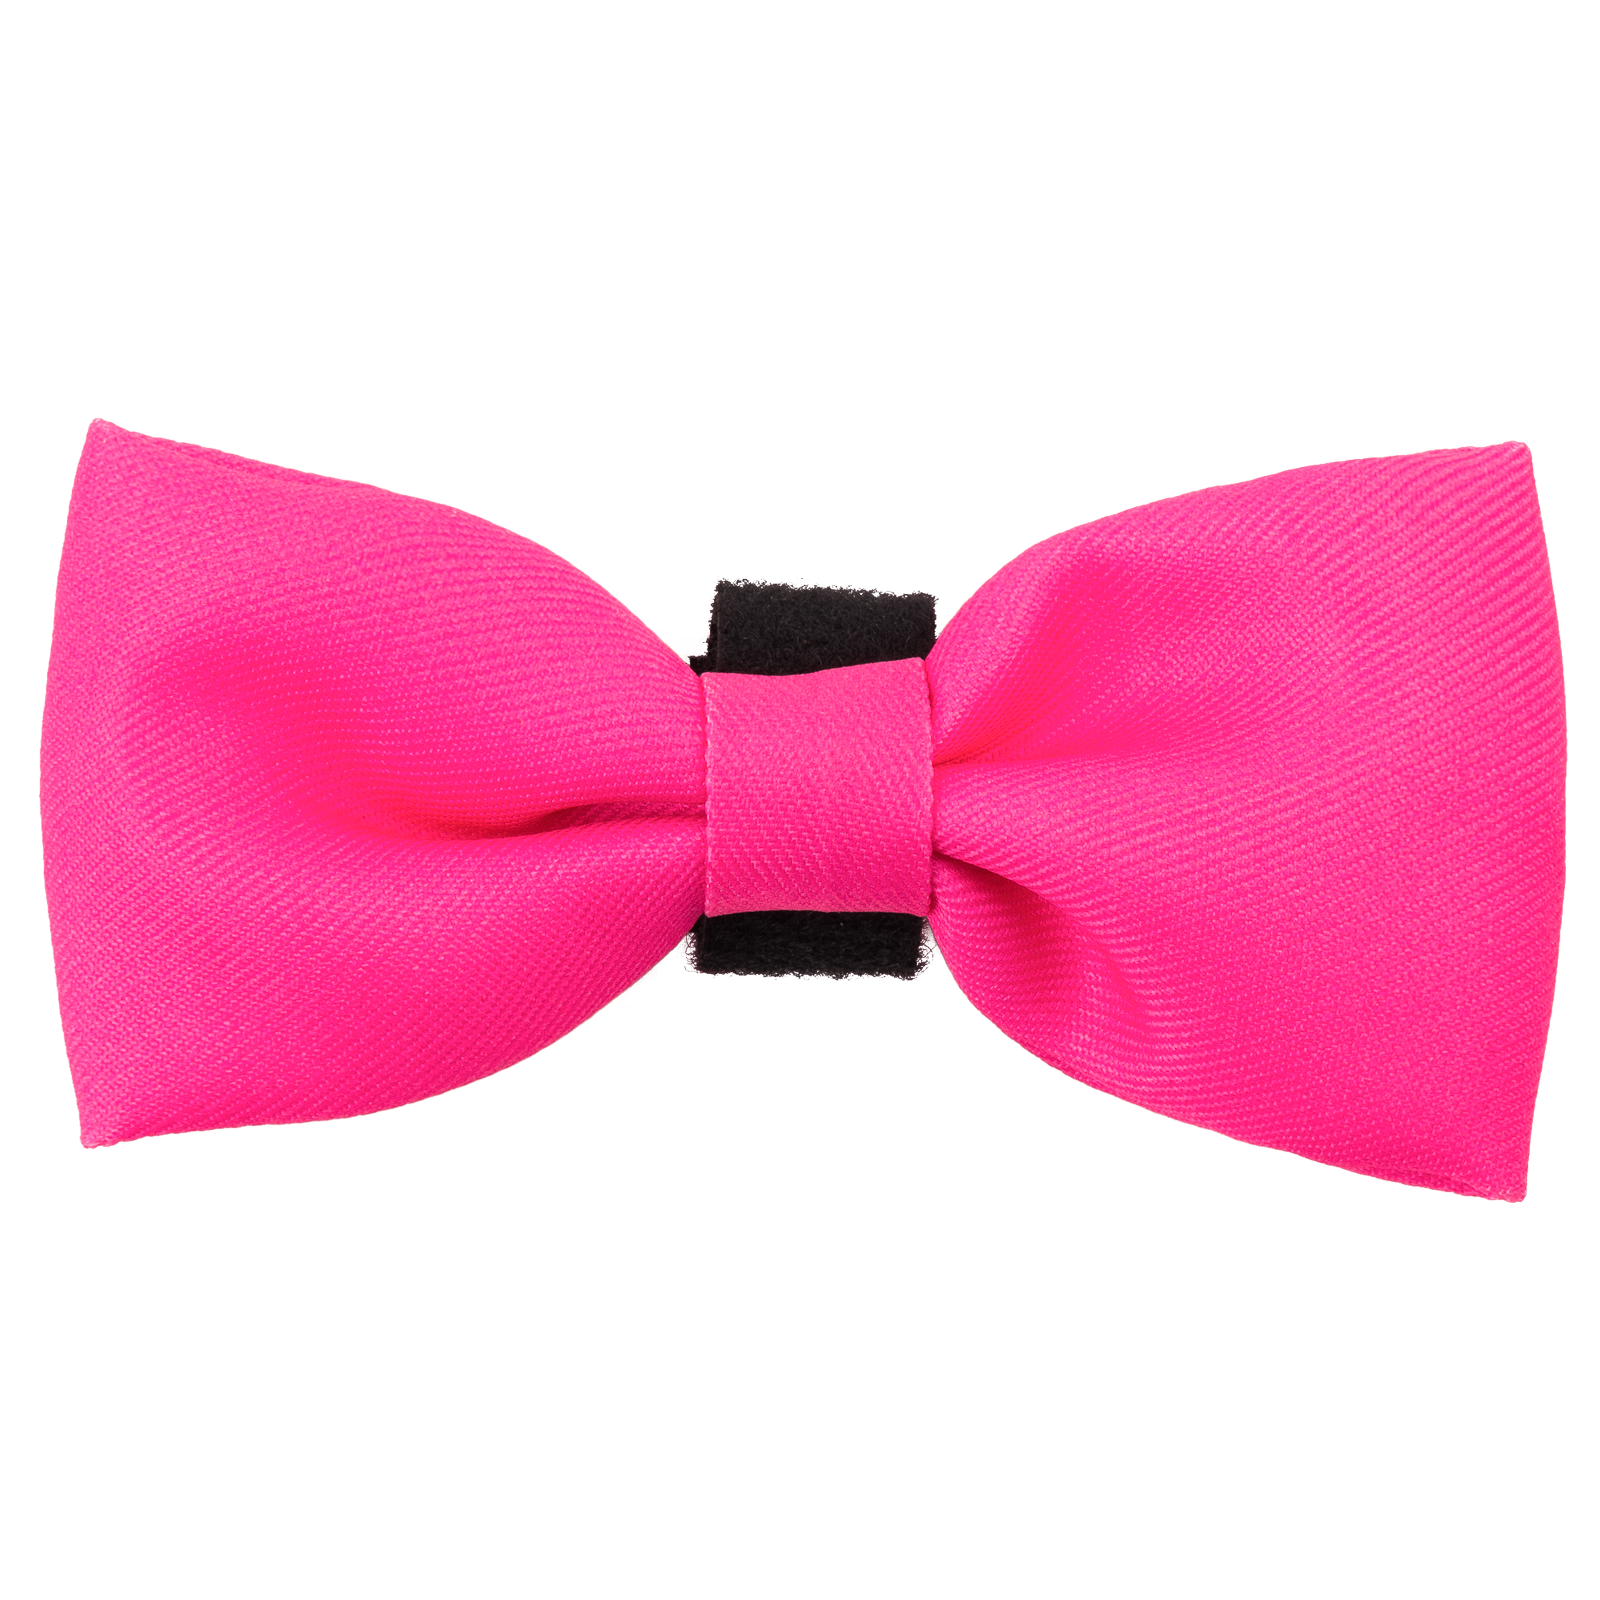 Bow Tie - The Hot Pink One.